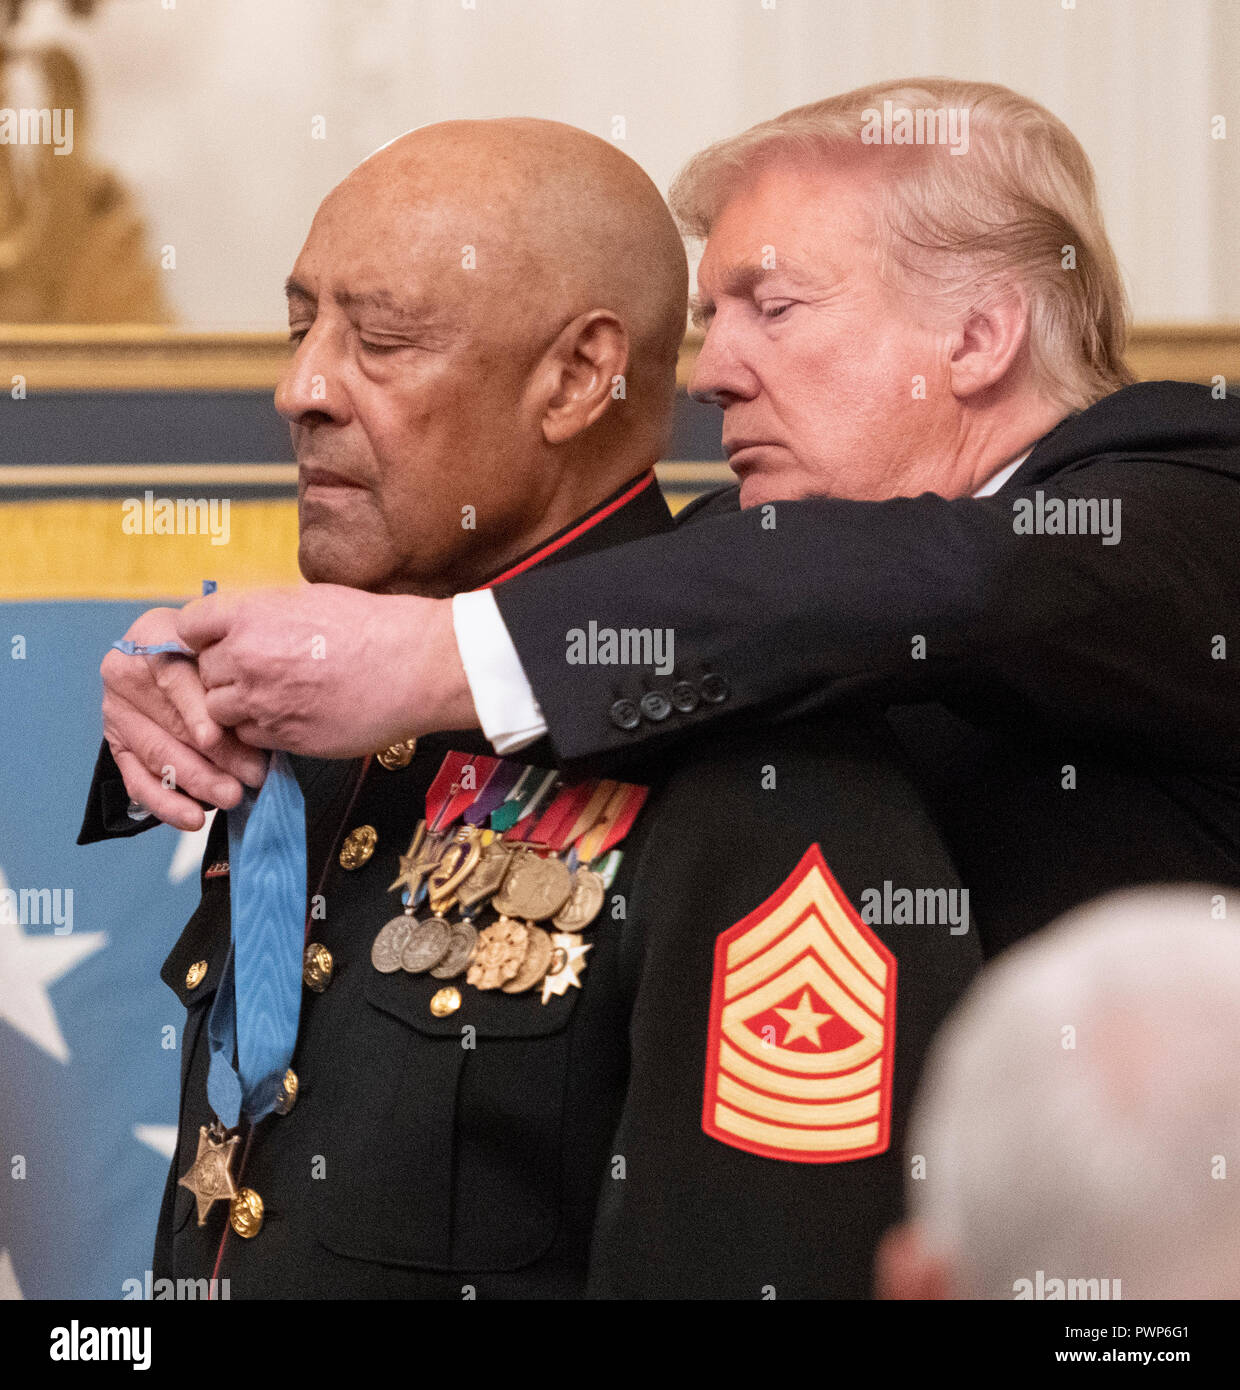 Washington, USA. 17th Oct 2018. United States President Donald J. Trump awards the Medal of Honor to Sergeant Major John L. Canley, United States Marine Corps (Retired), for conspicuous gallantry during the Vietnam War in a ceremony in the East Room of the the White House in Washington, DC on Wednesday, October 17, 2018. Credit: Ron Sachs/CNP/MediaPunch Credit: MediaPunch Inc/Alamy Live News Stock Photo